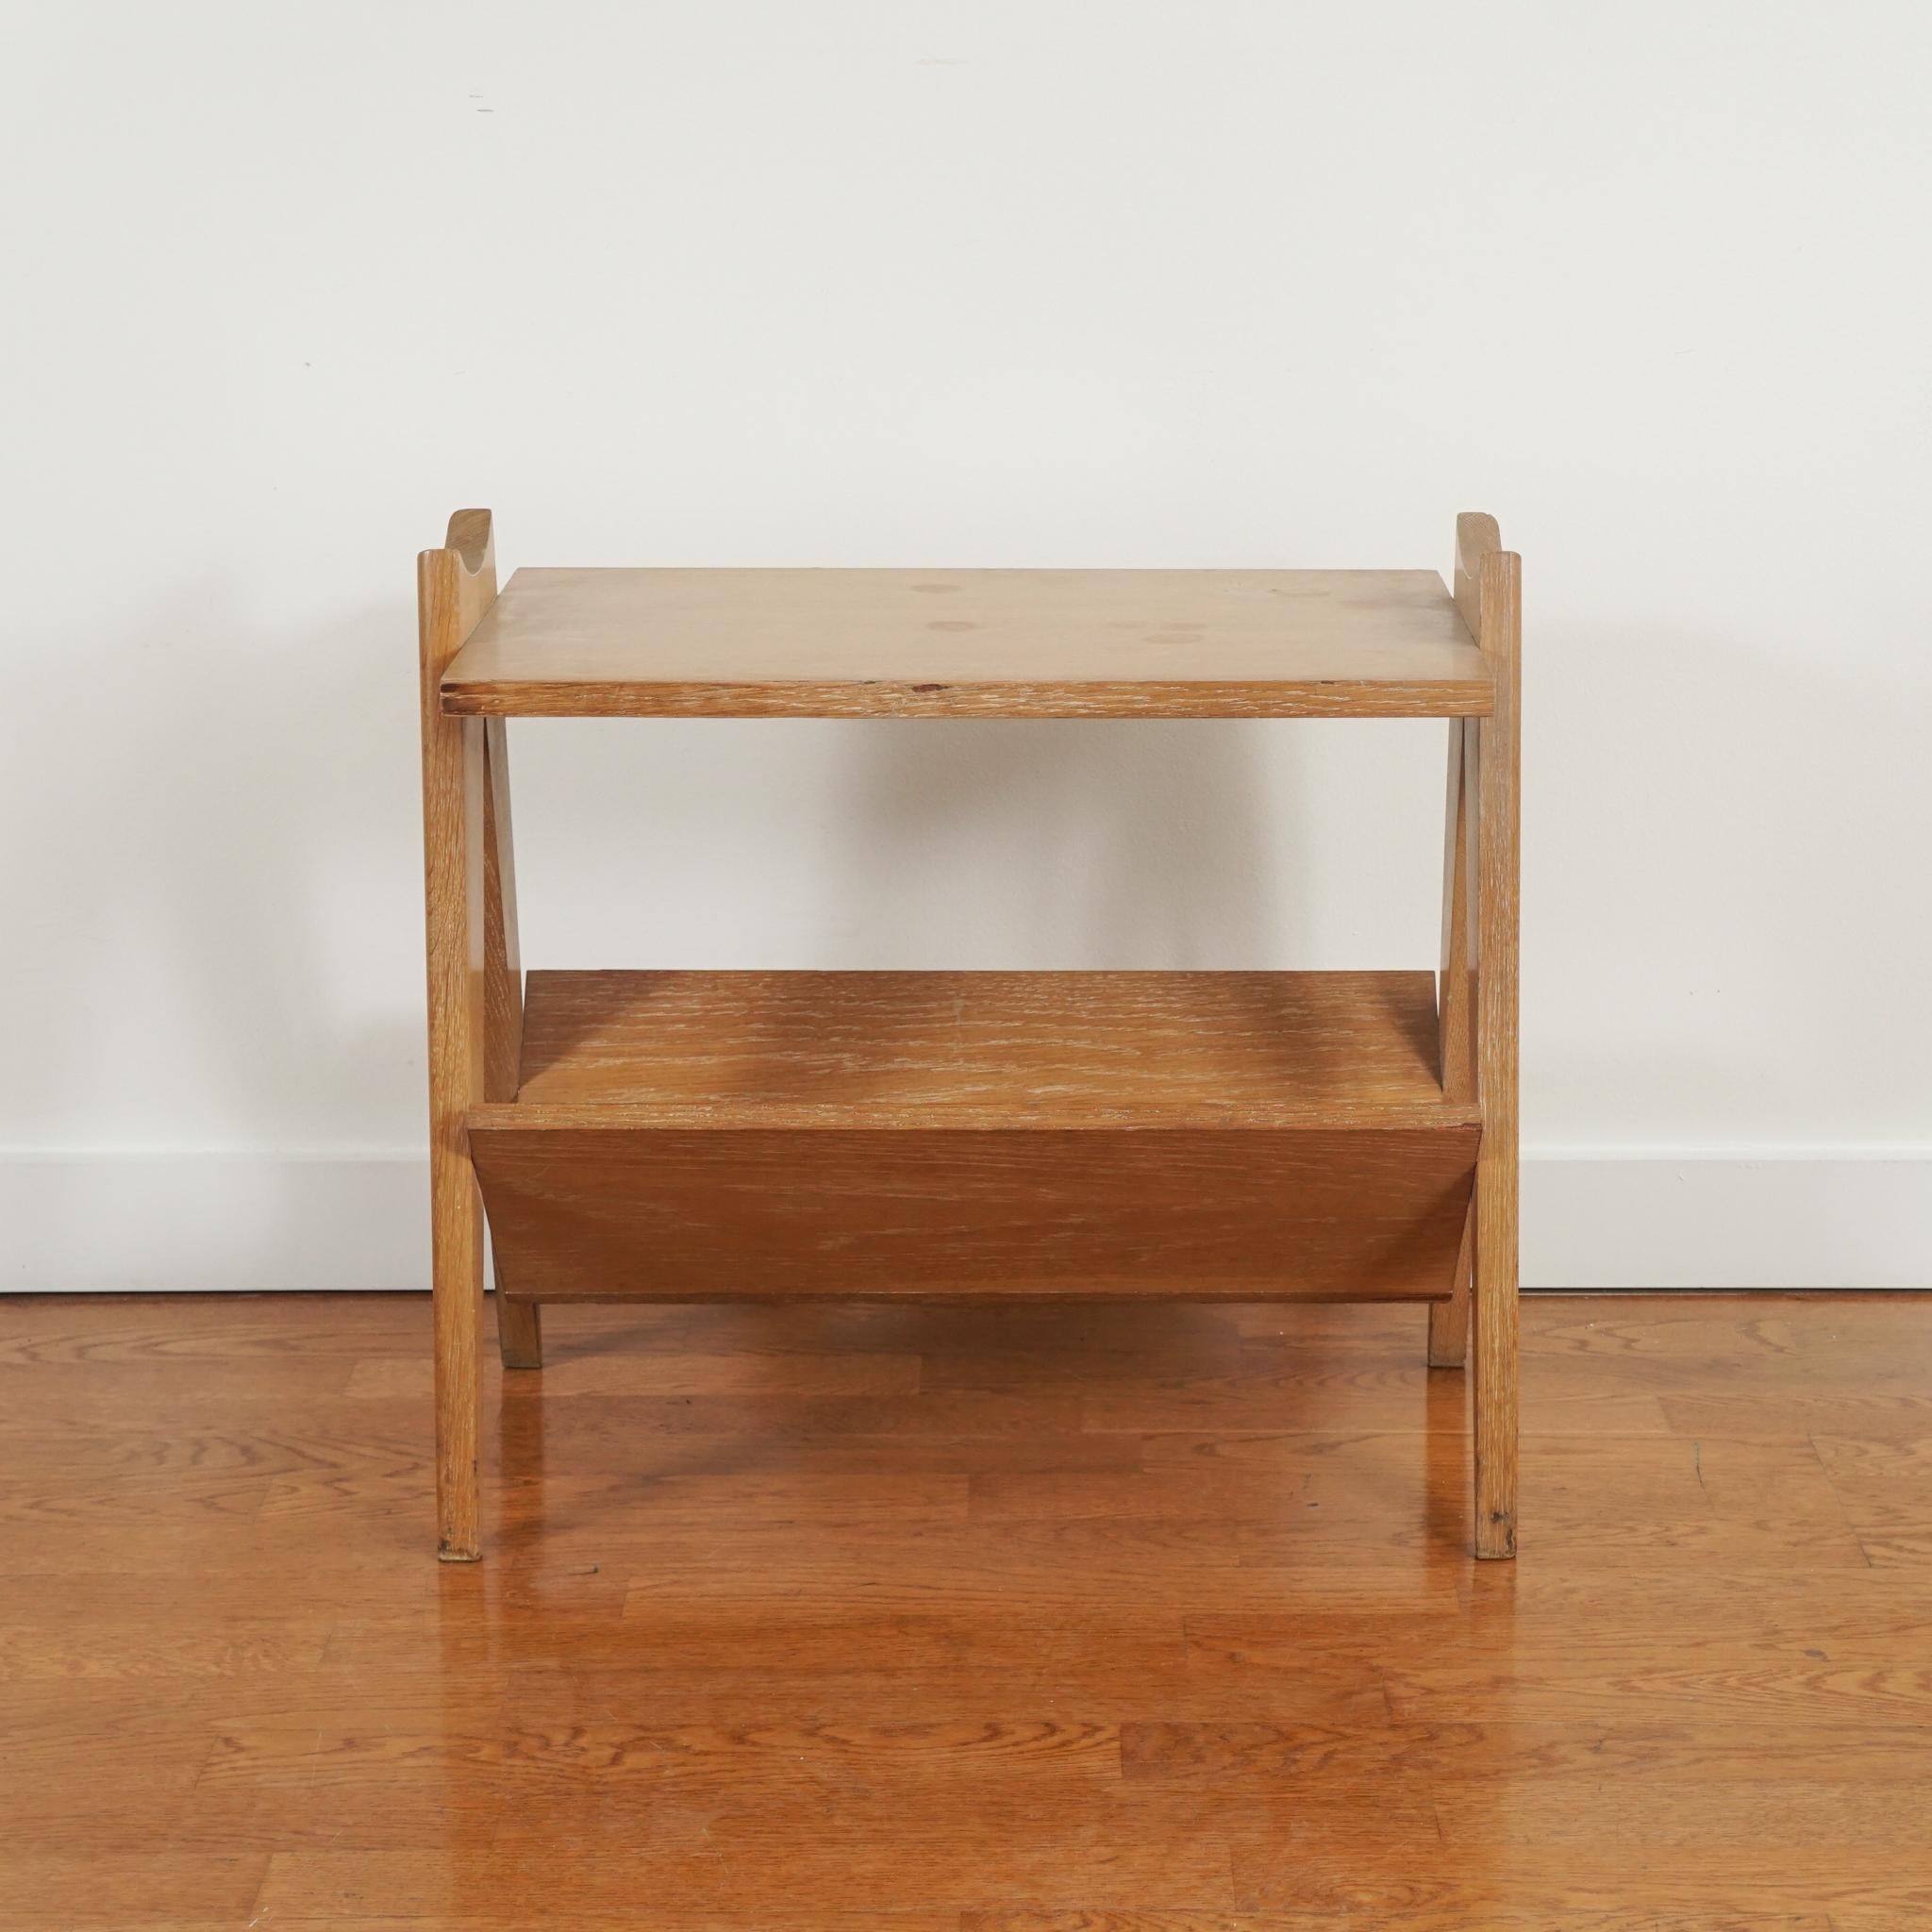 This unique oak side table was made by Robert Guillerme and Jacques Chambron—the French creative team behind Votre Maison. Made in the 1960s, the honey-colored oak side table with magazine storage below is distinctive in its simplicity, scale and